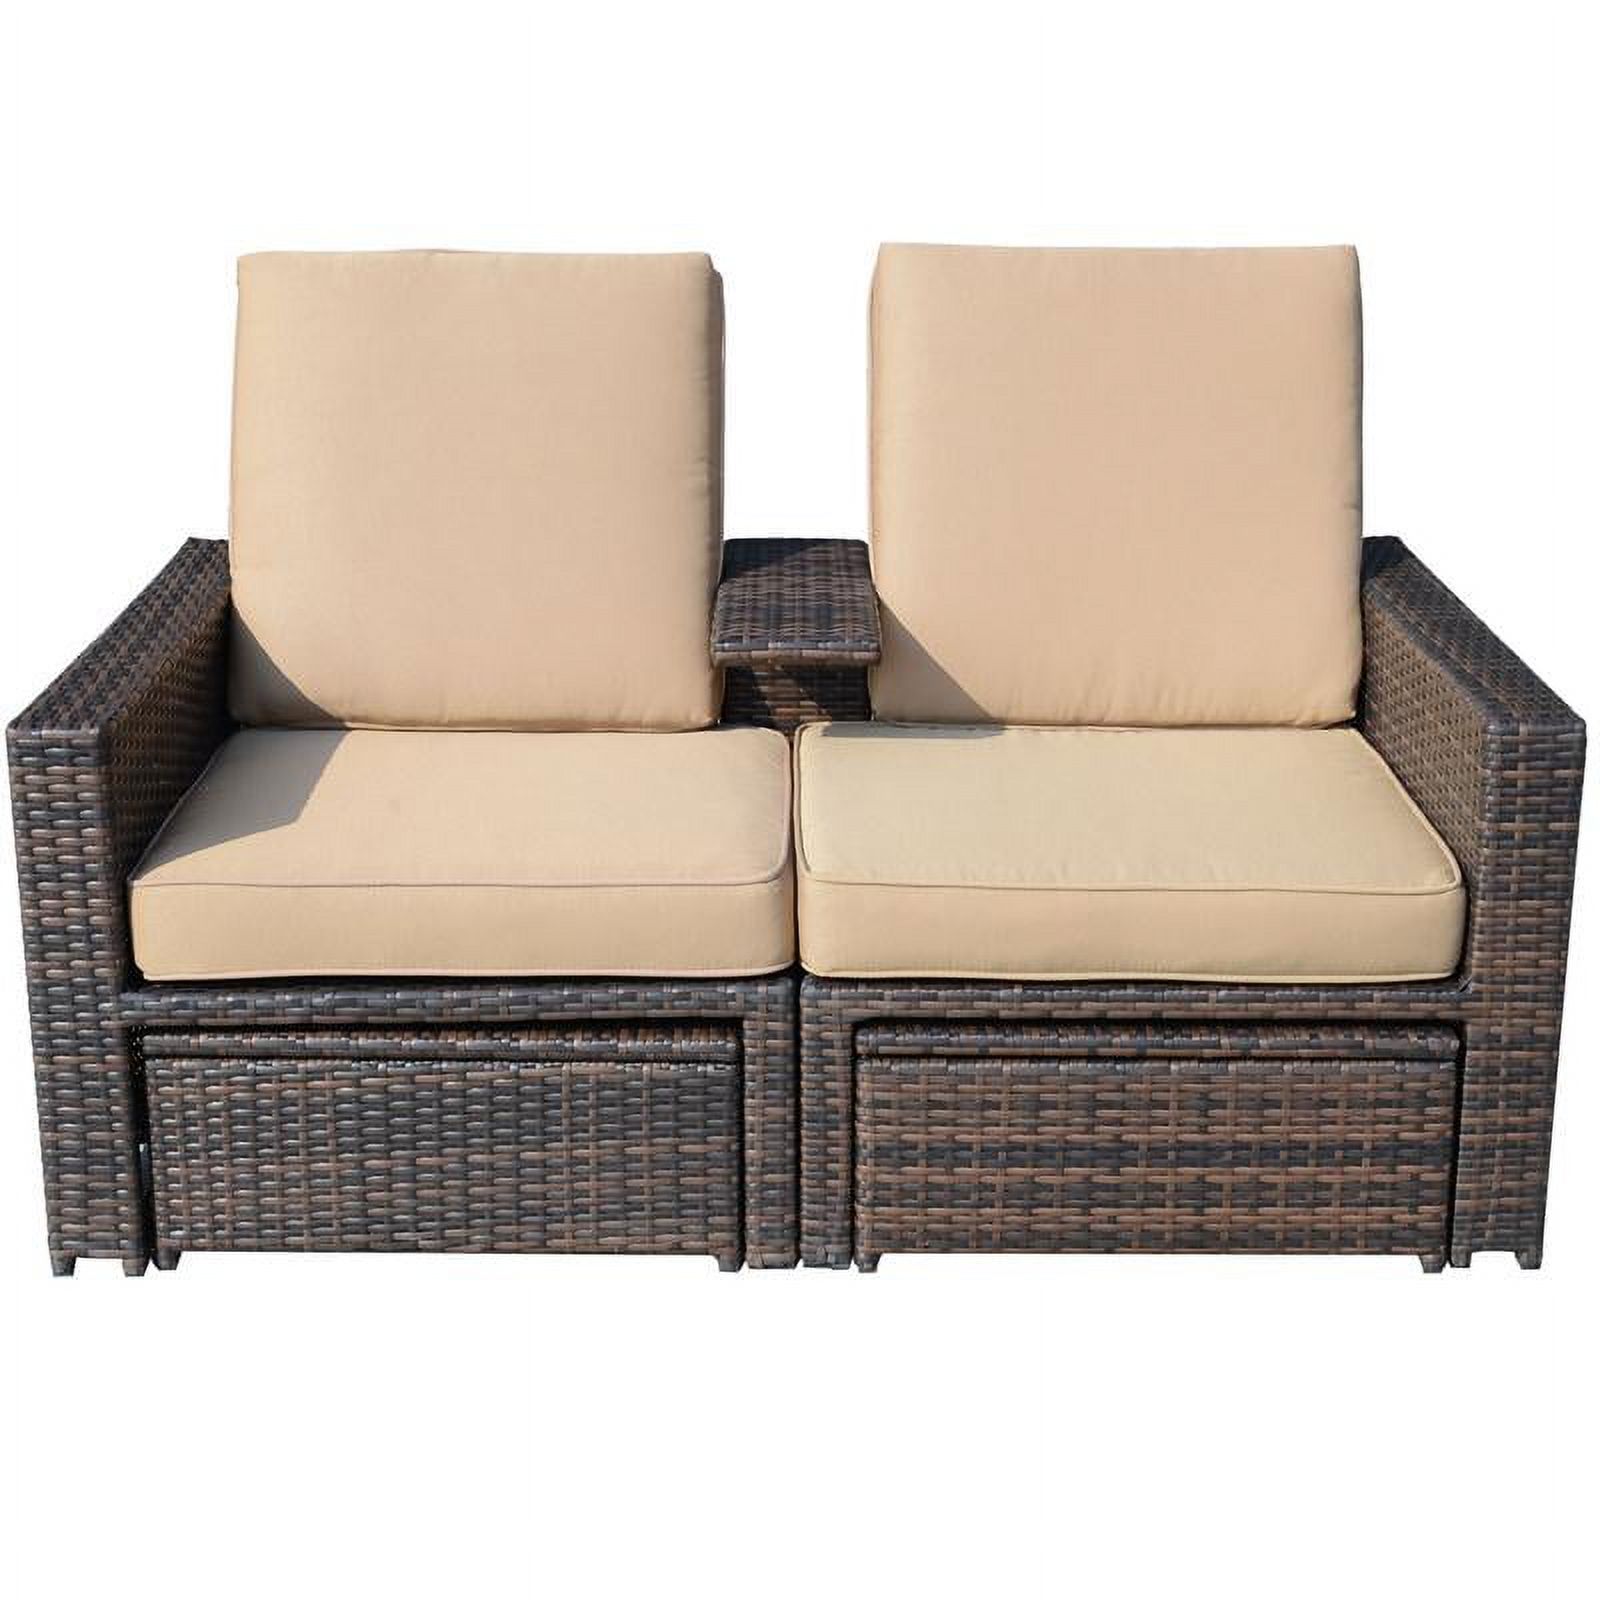 Outsunny 3 Piece Patio Sofa Set Recliner Lounge Ottoman Loveseat Rattan Outdoor, seating capacity-2 - image 1 of 10